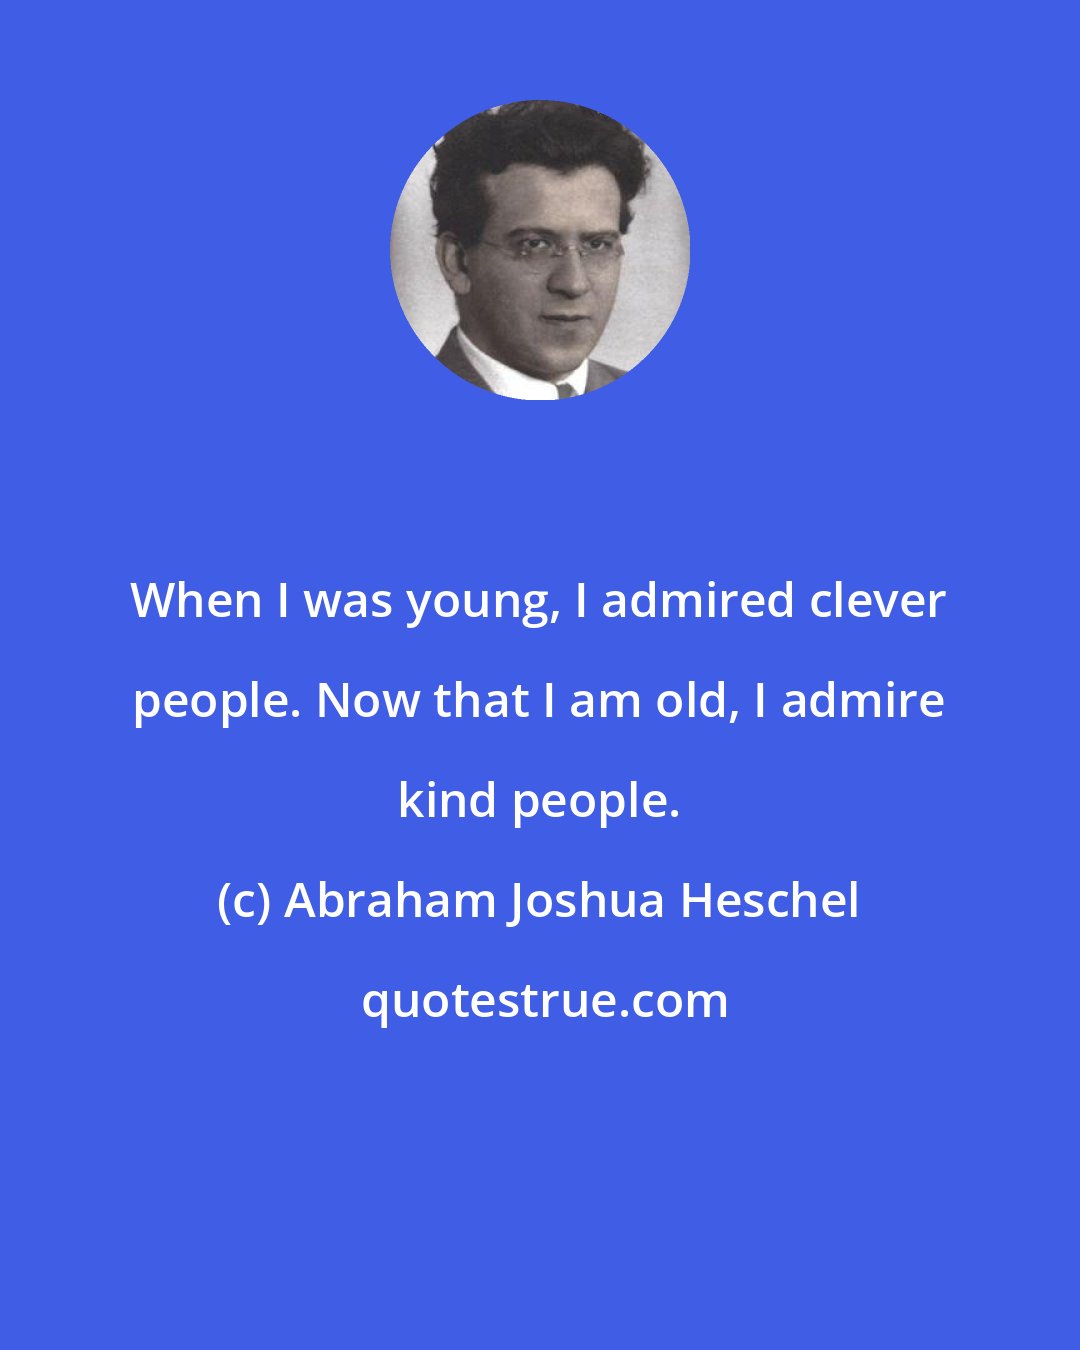 Abraham Joshua Heschel: When I was young, I admired clever people. Now that I am old, I admire kind people.